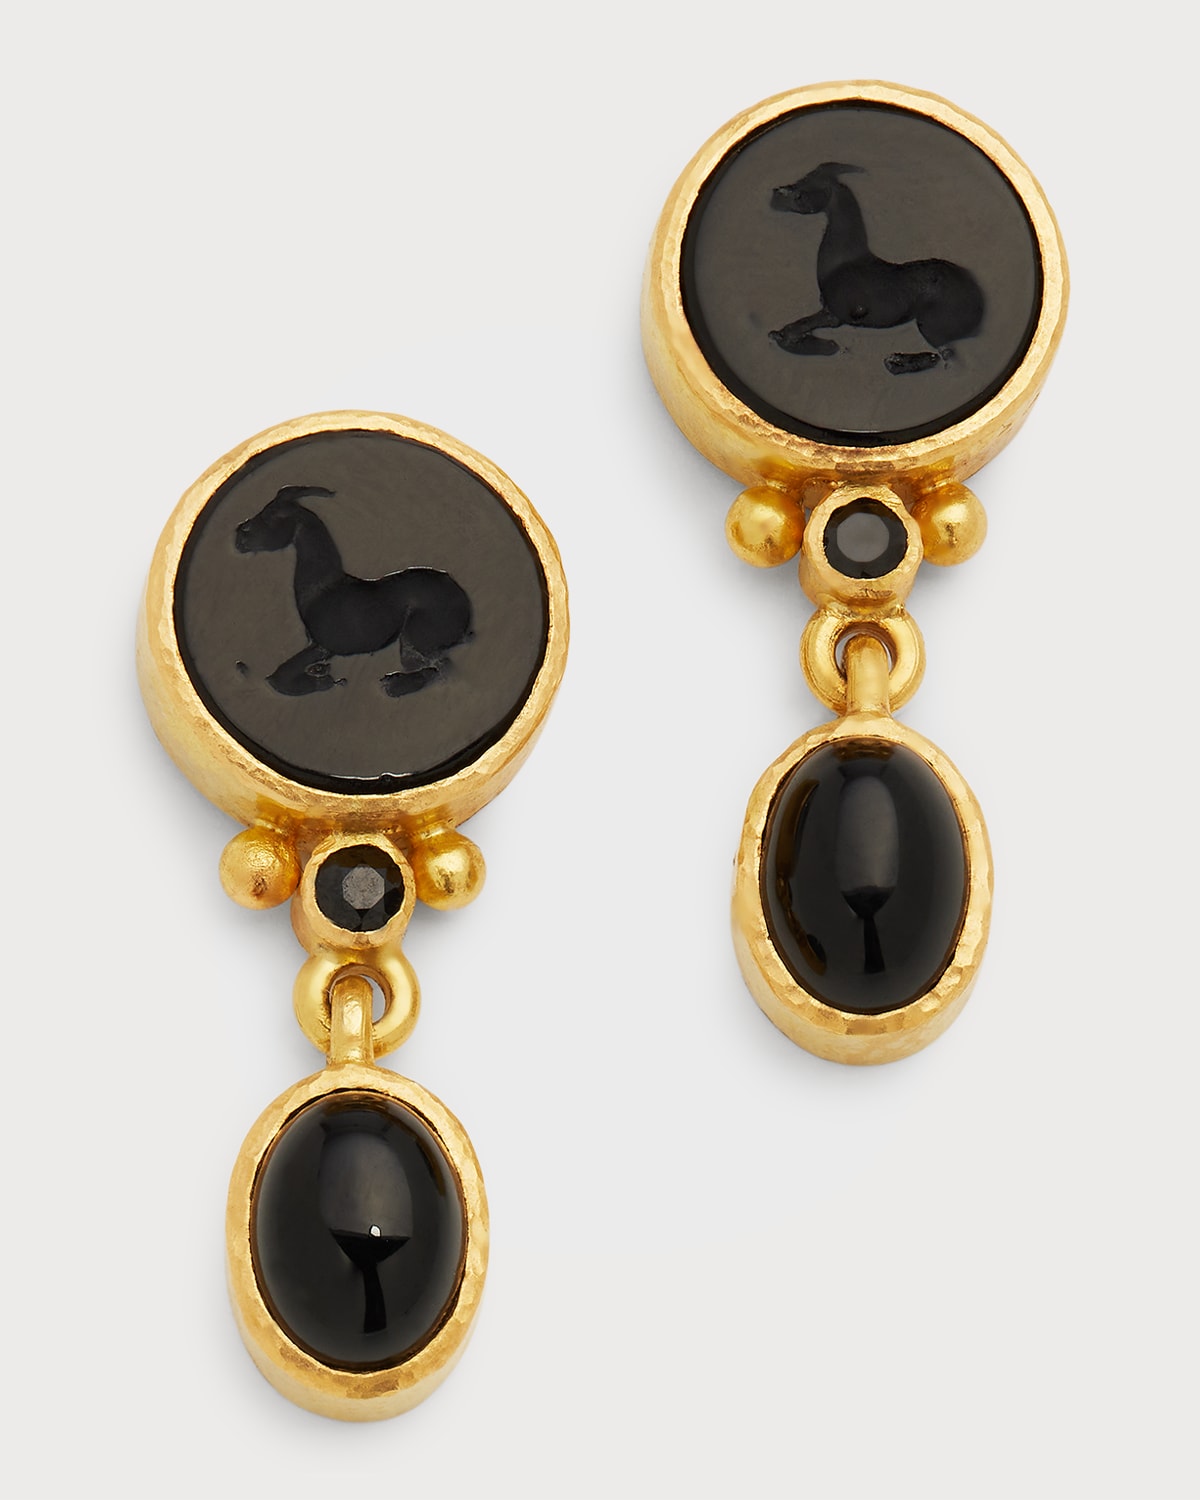 19K Yellow Gold Venetian Glass Tiny Horse Earrings with Cabochon Stone